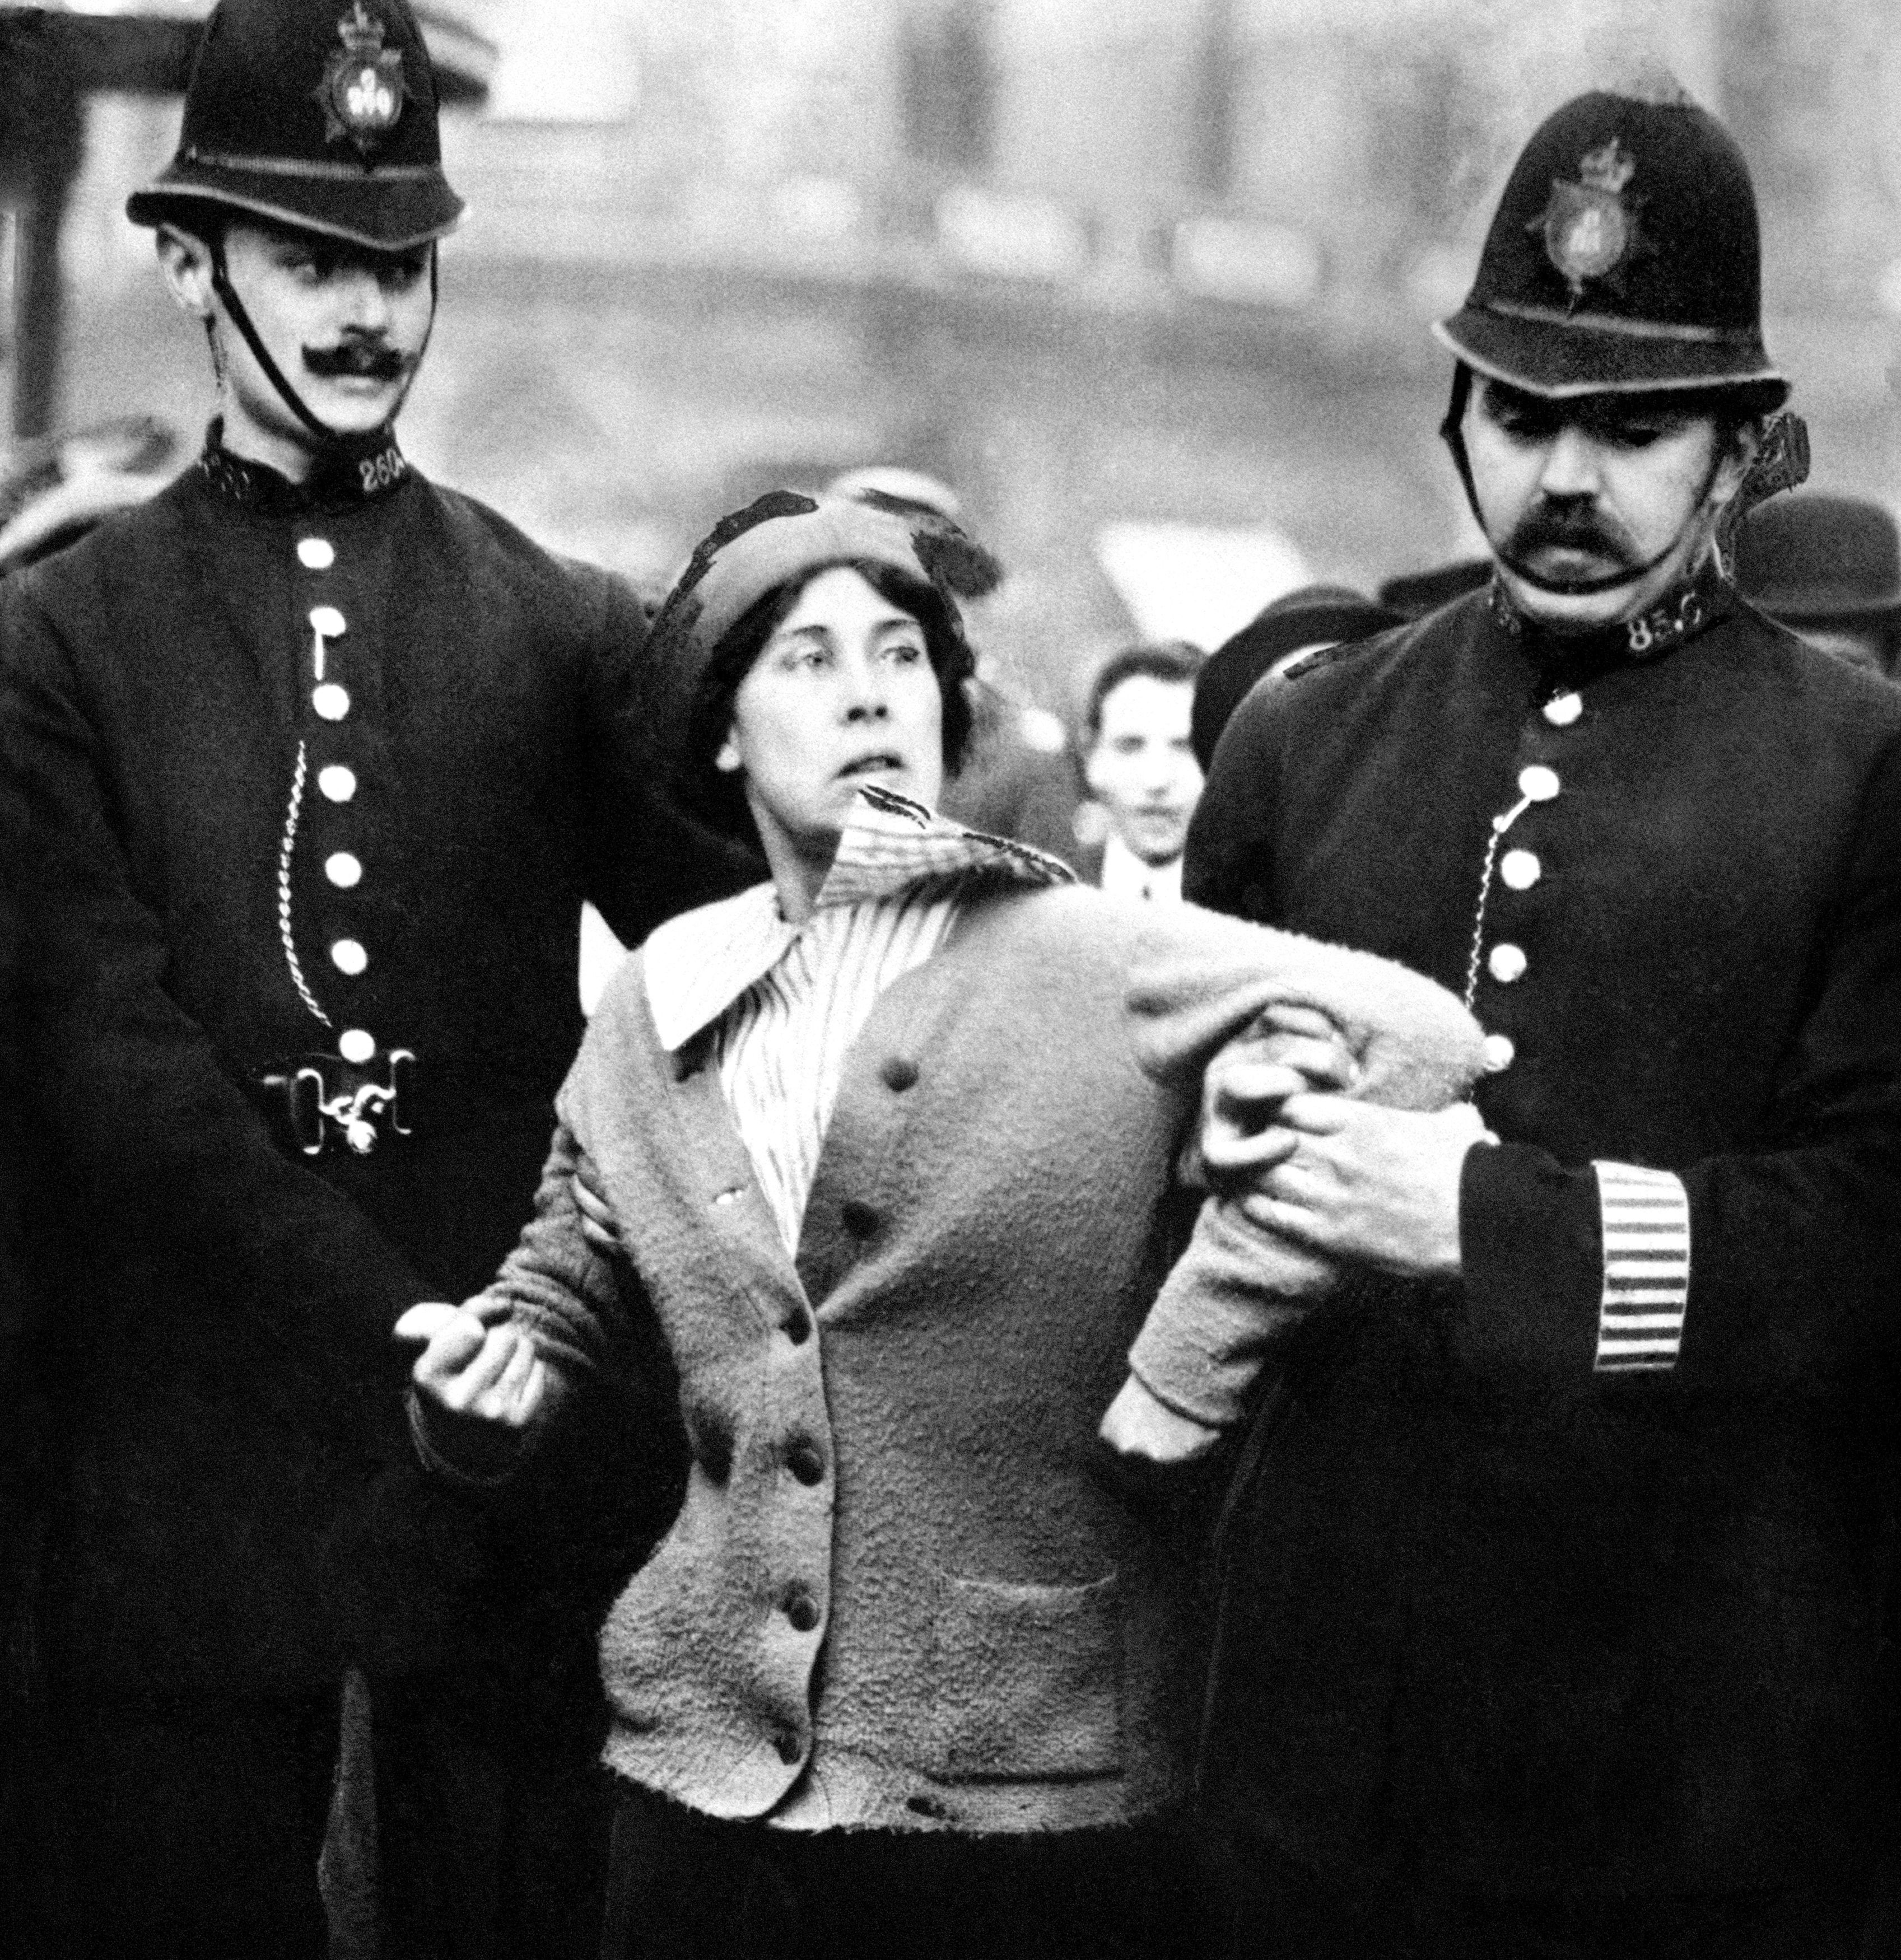 A suffragette being arrested by police officers in 1914 (PA)